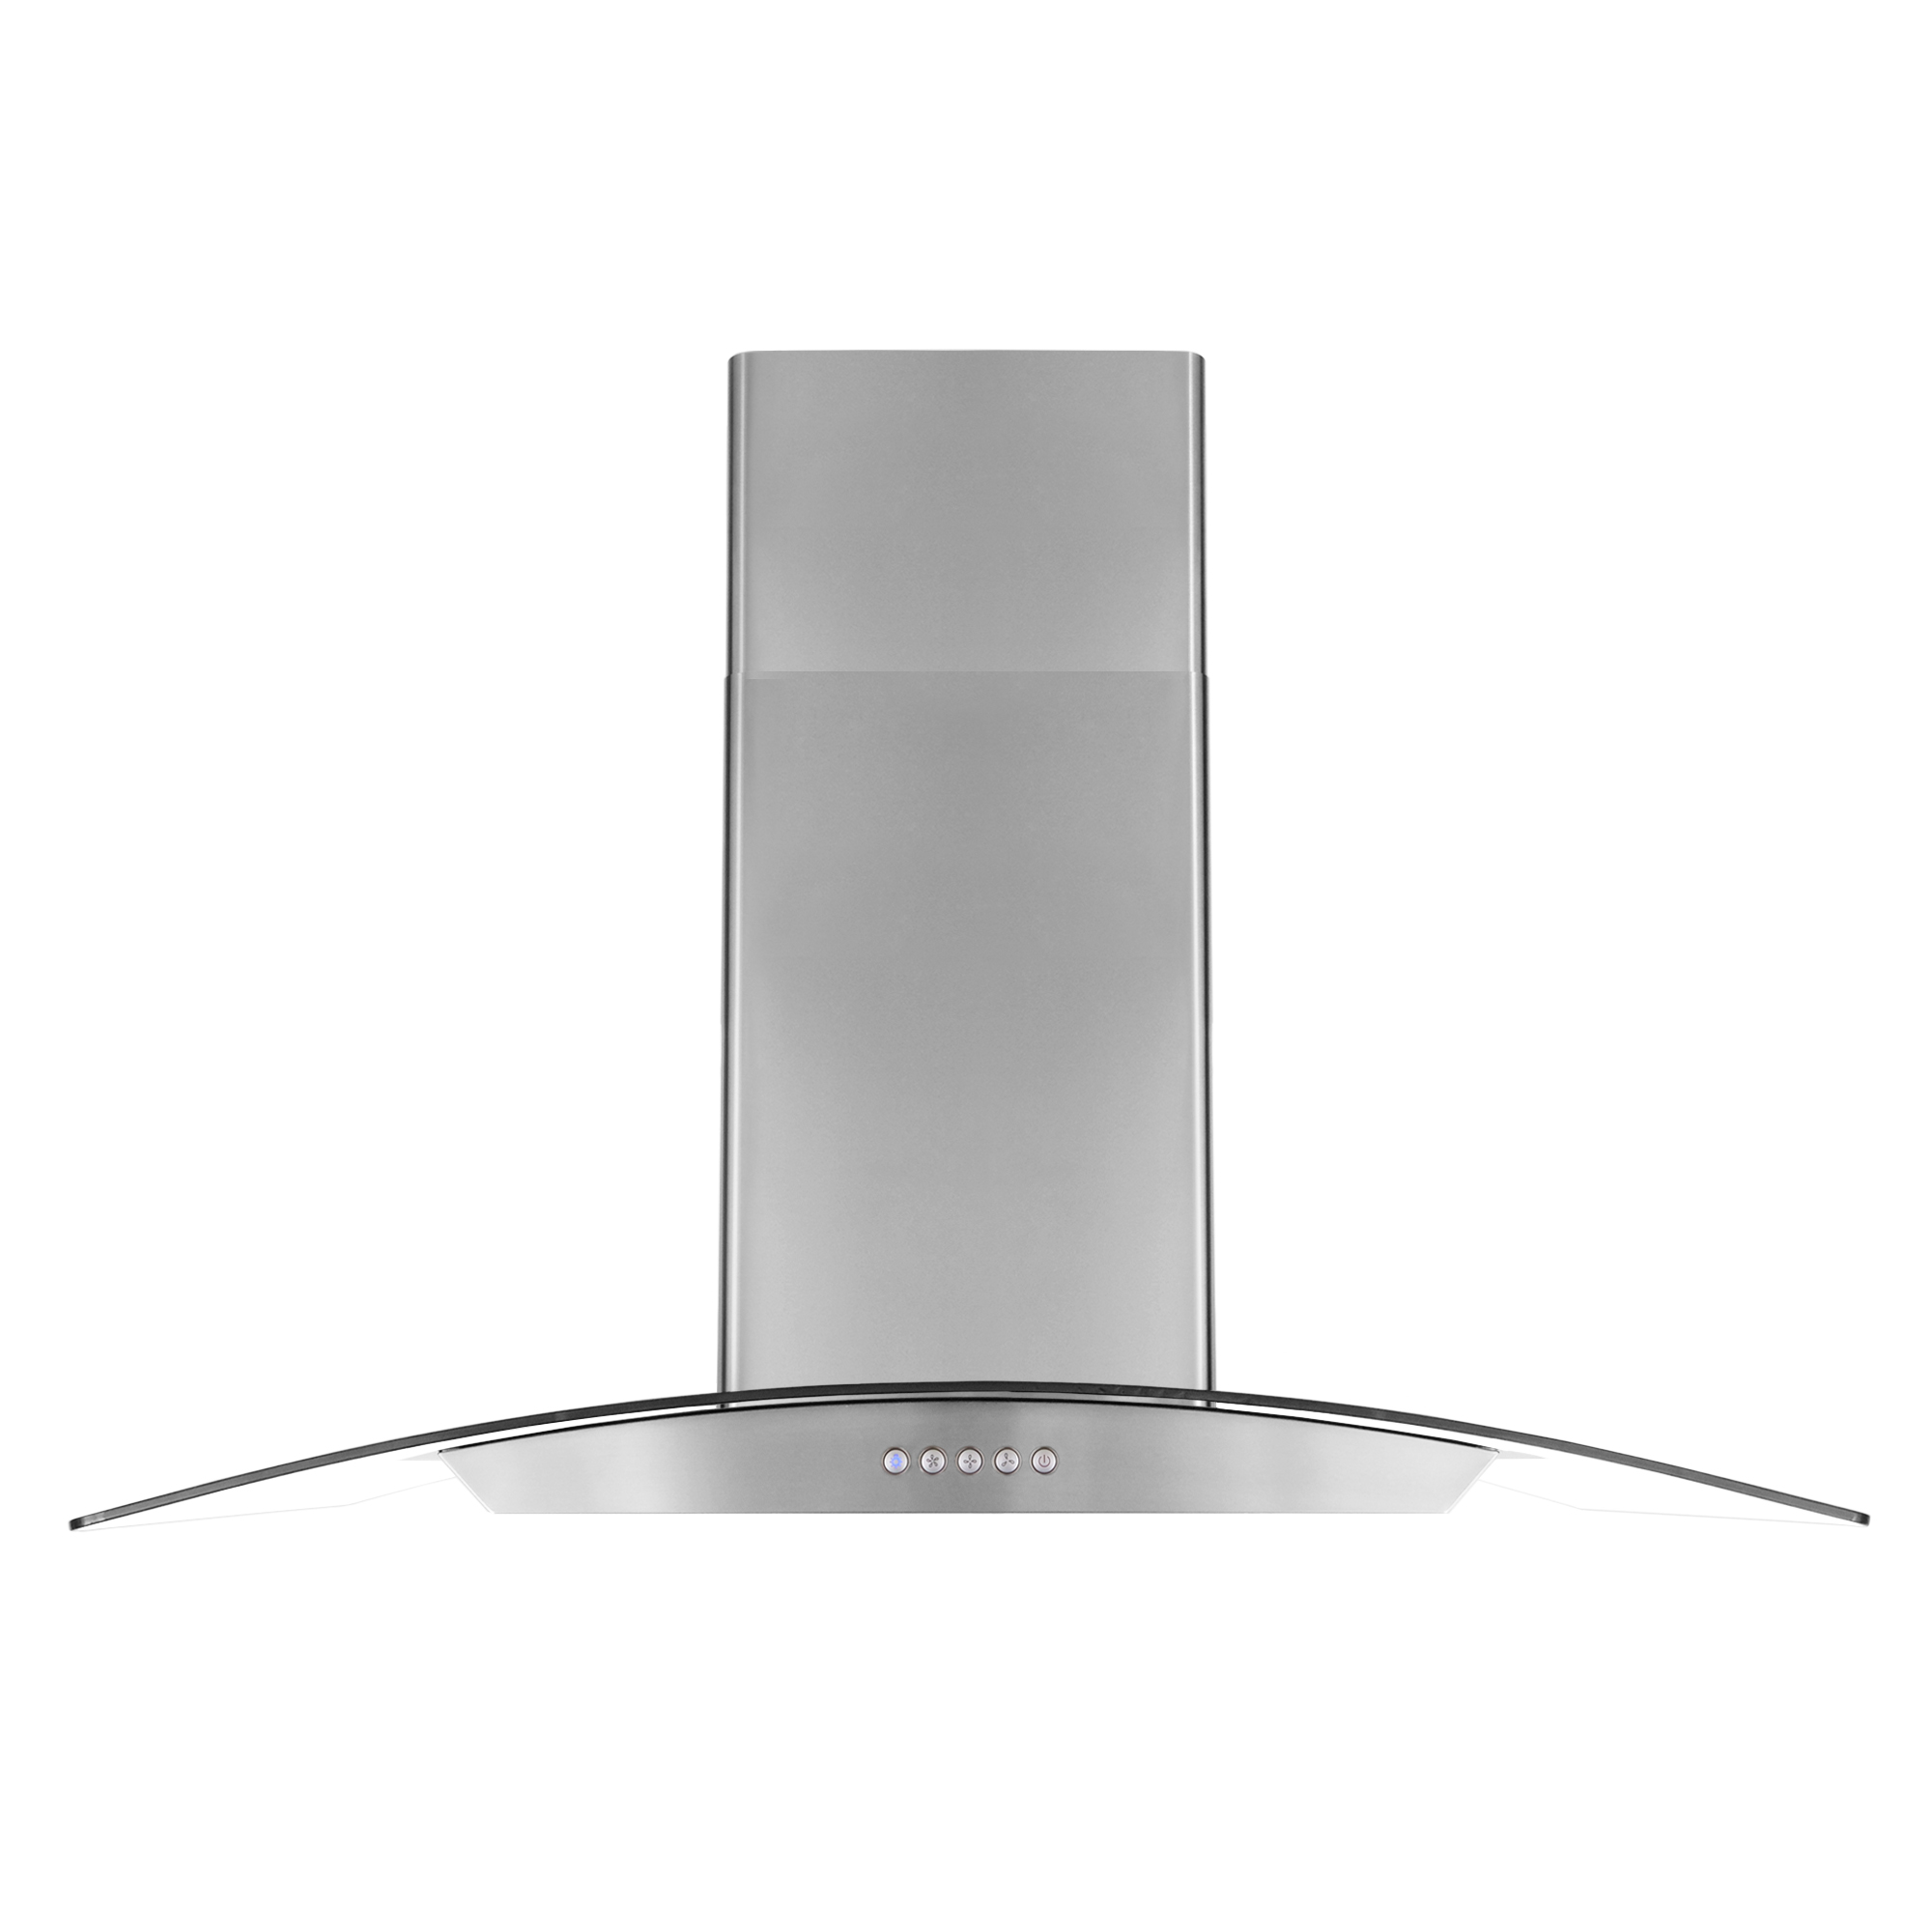 36 in. Ducted Wall Mount Range Hood in Stainless Steel with Push Button ...